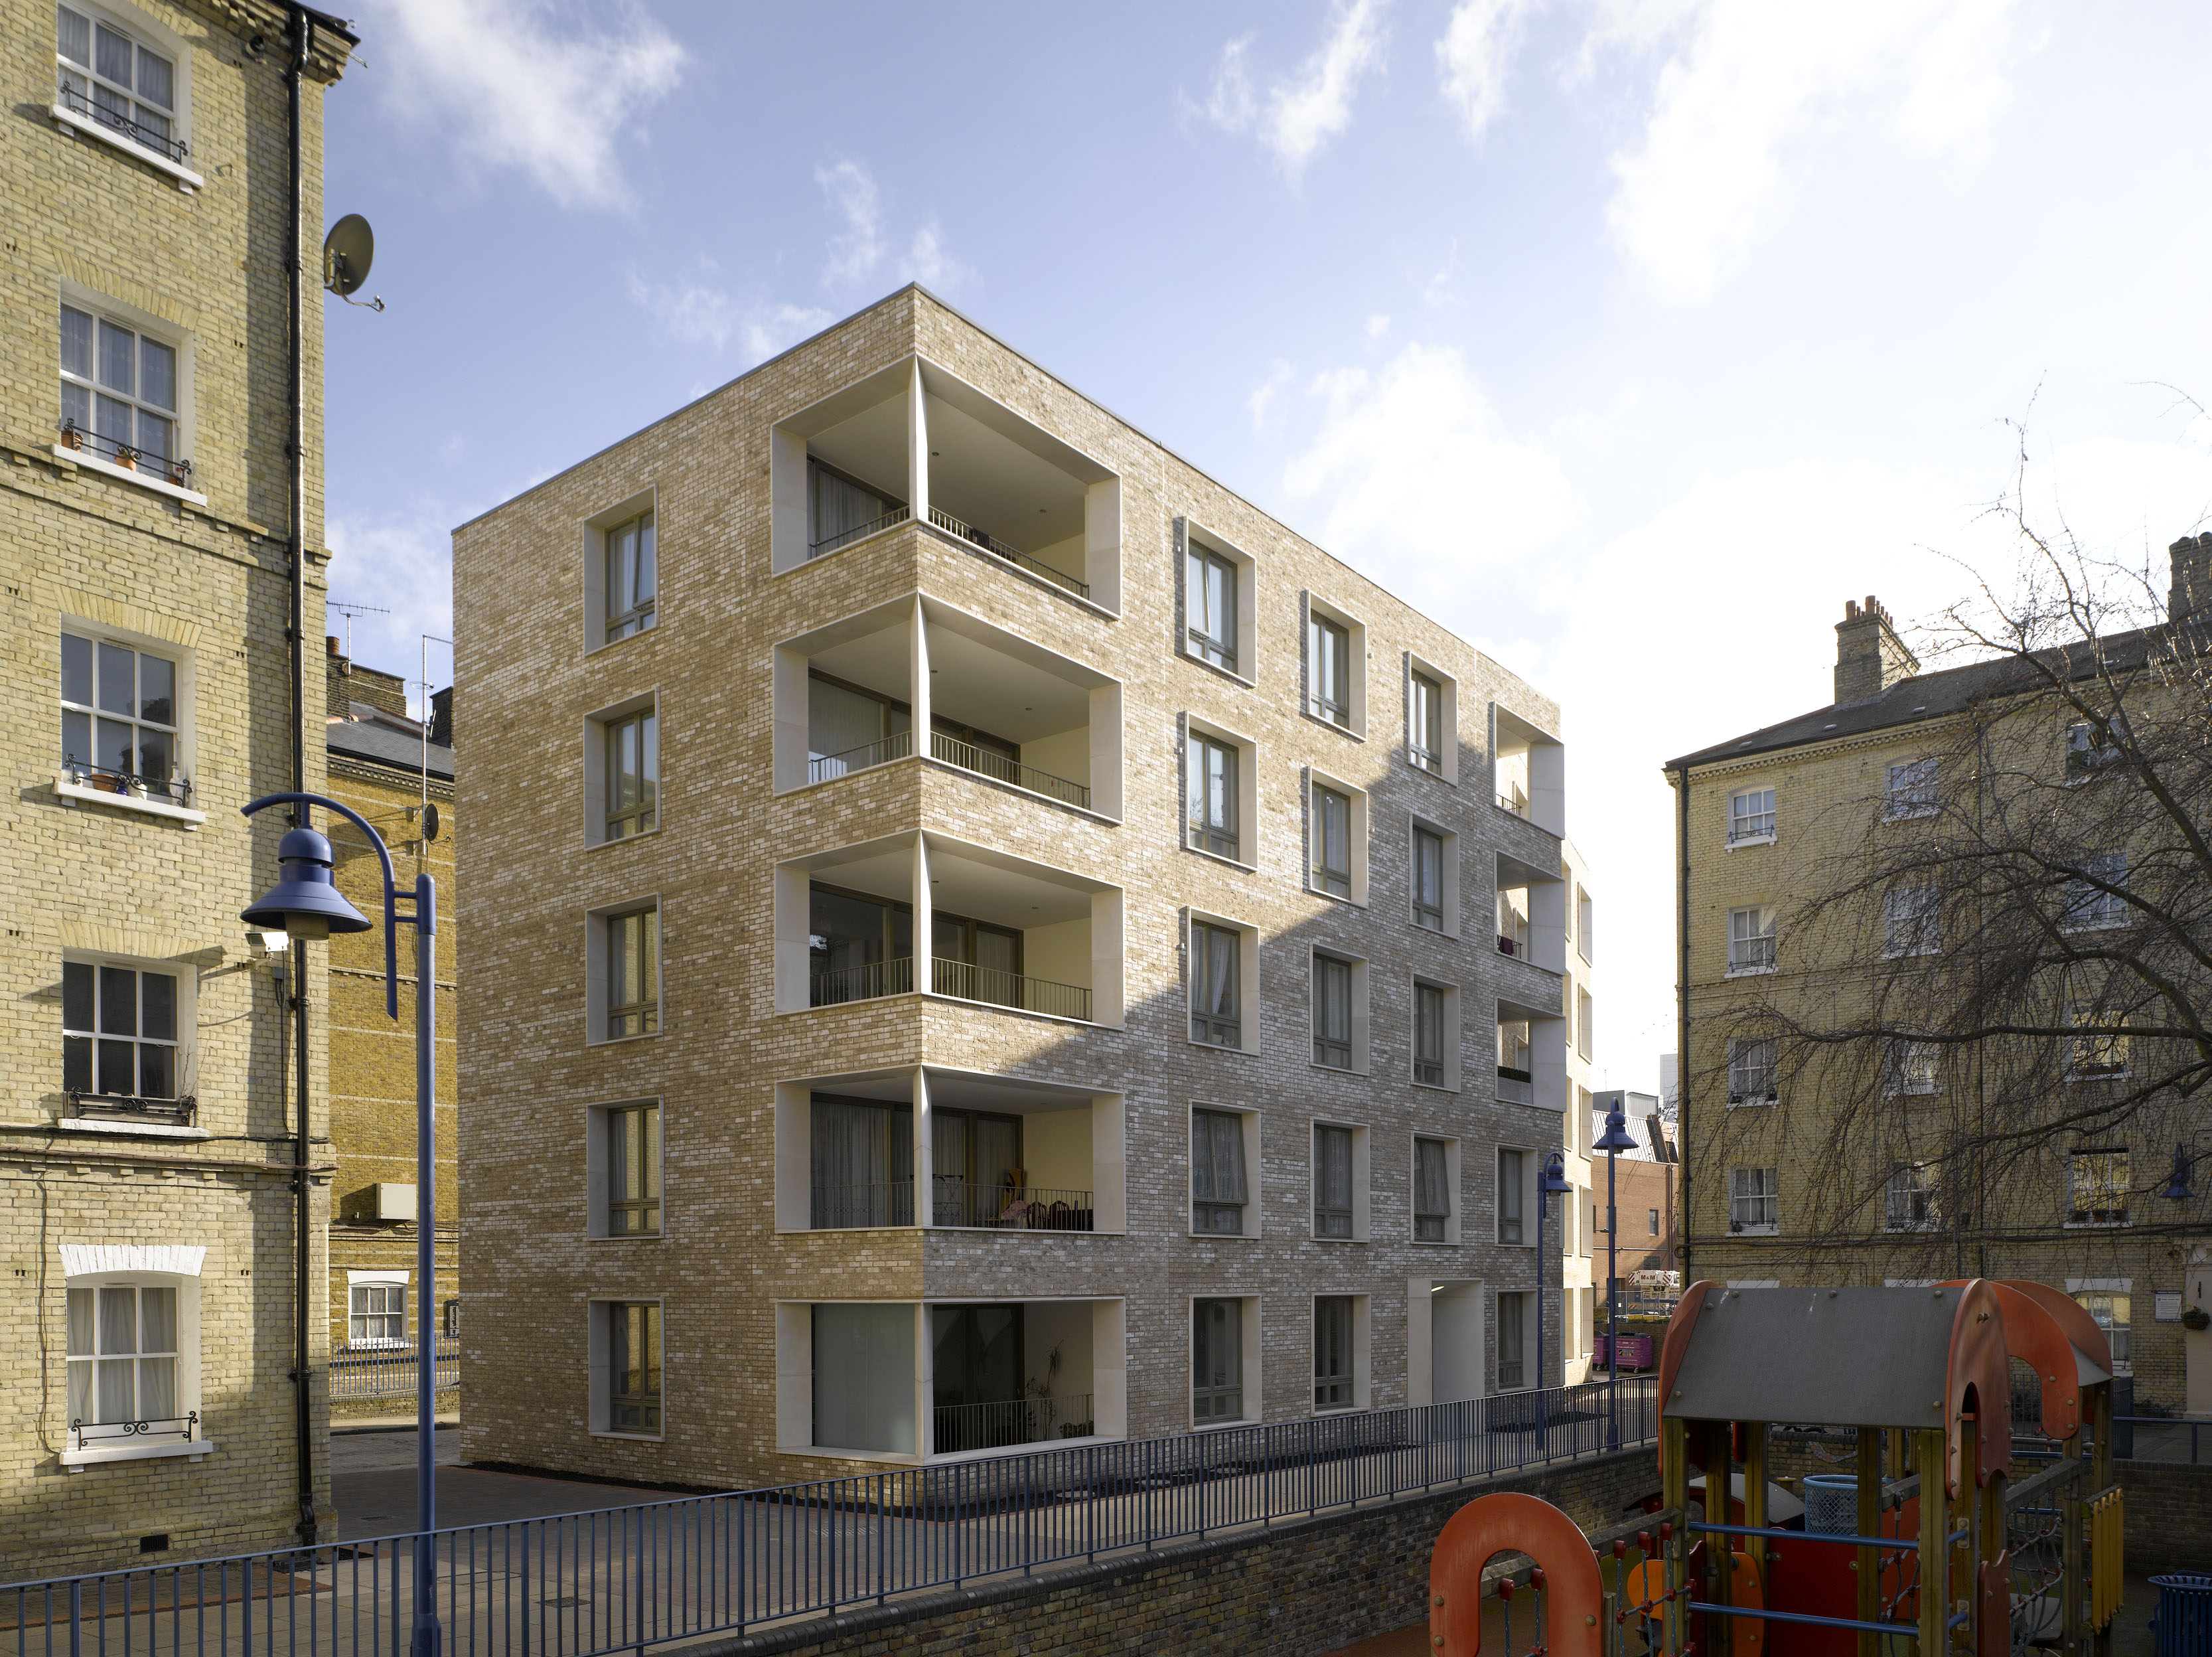 Wienerberger brick used on new-build housing block in an affordable London housing development